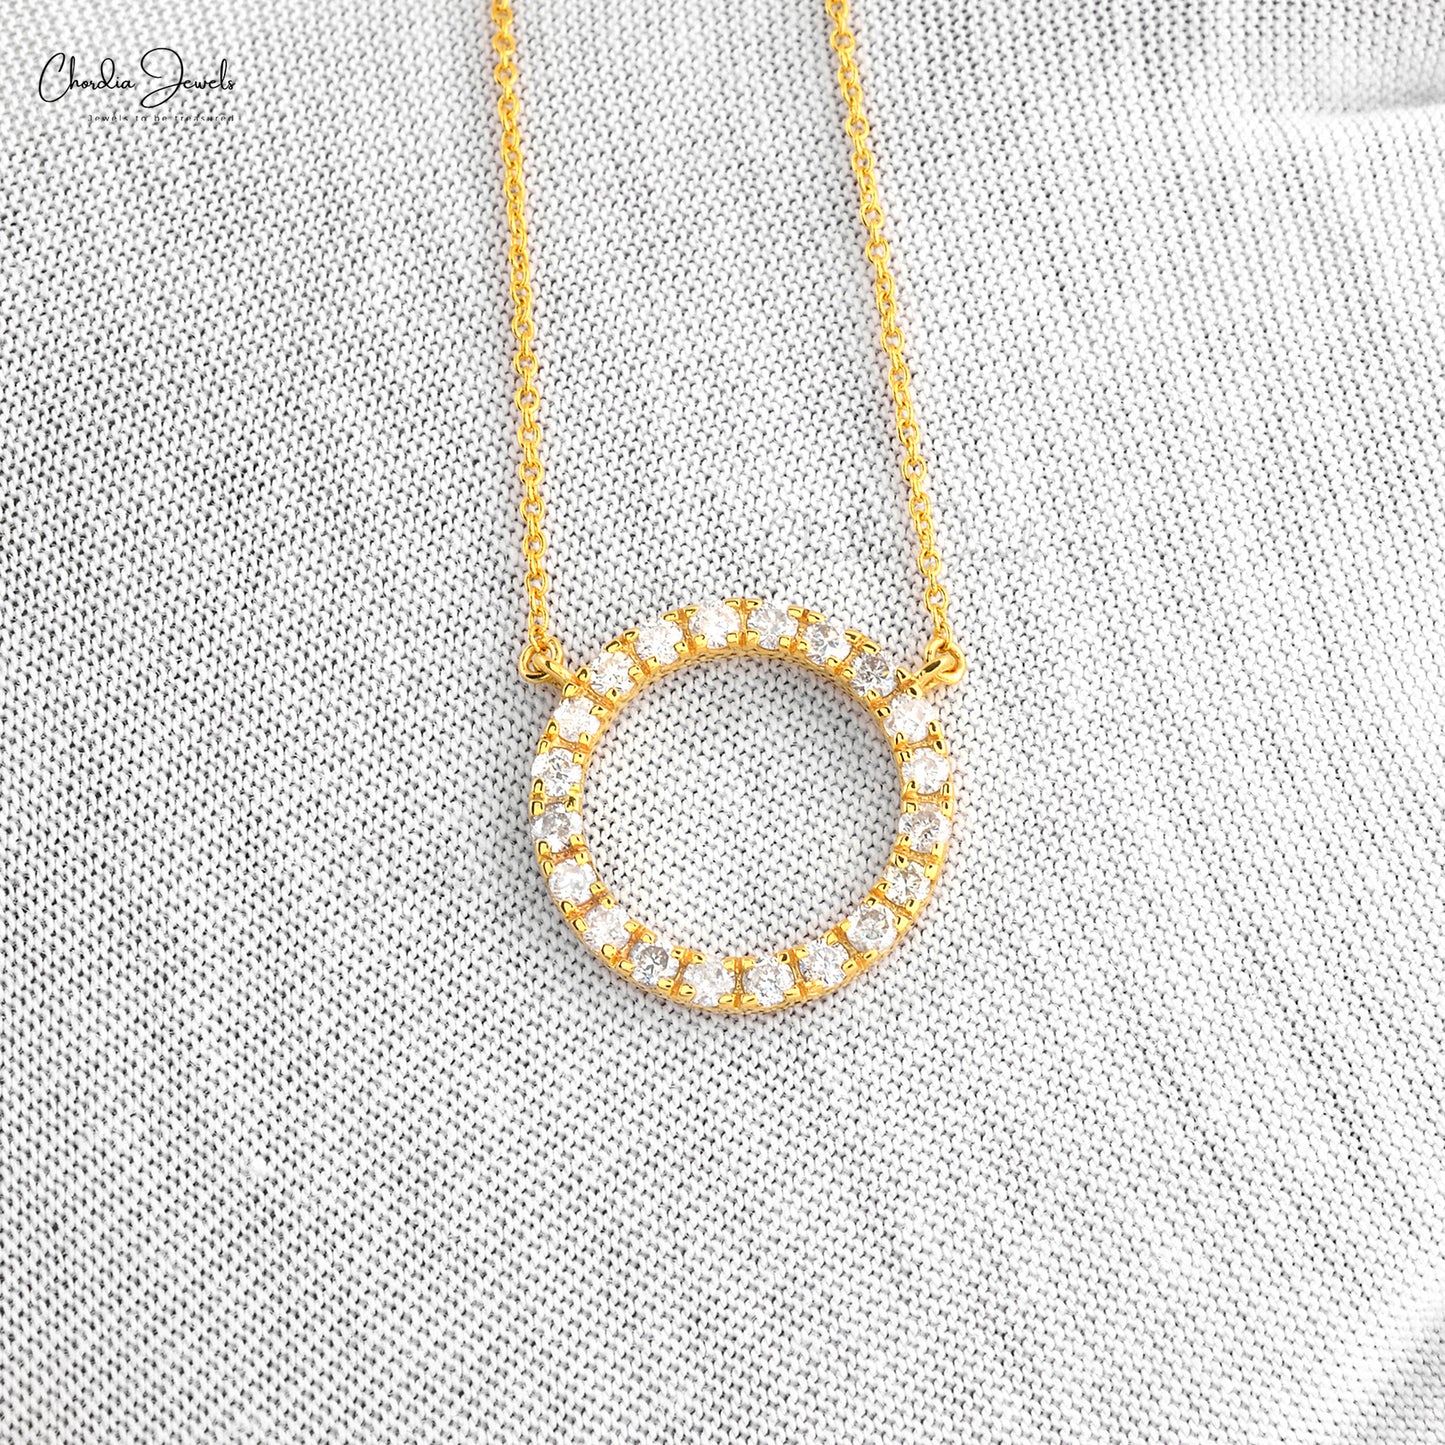 Load image into Gallery viewer, Classic Design Solid 14k Yellow Gold Round Circle Natural Diamond Necklace Pendant Engagement Necklace For Women Gifts Jewelry
